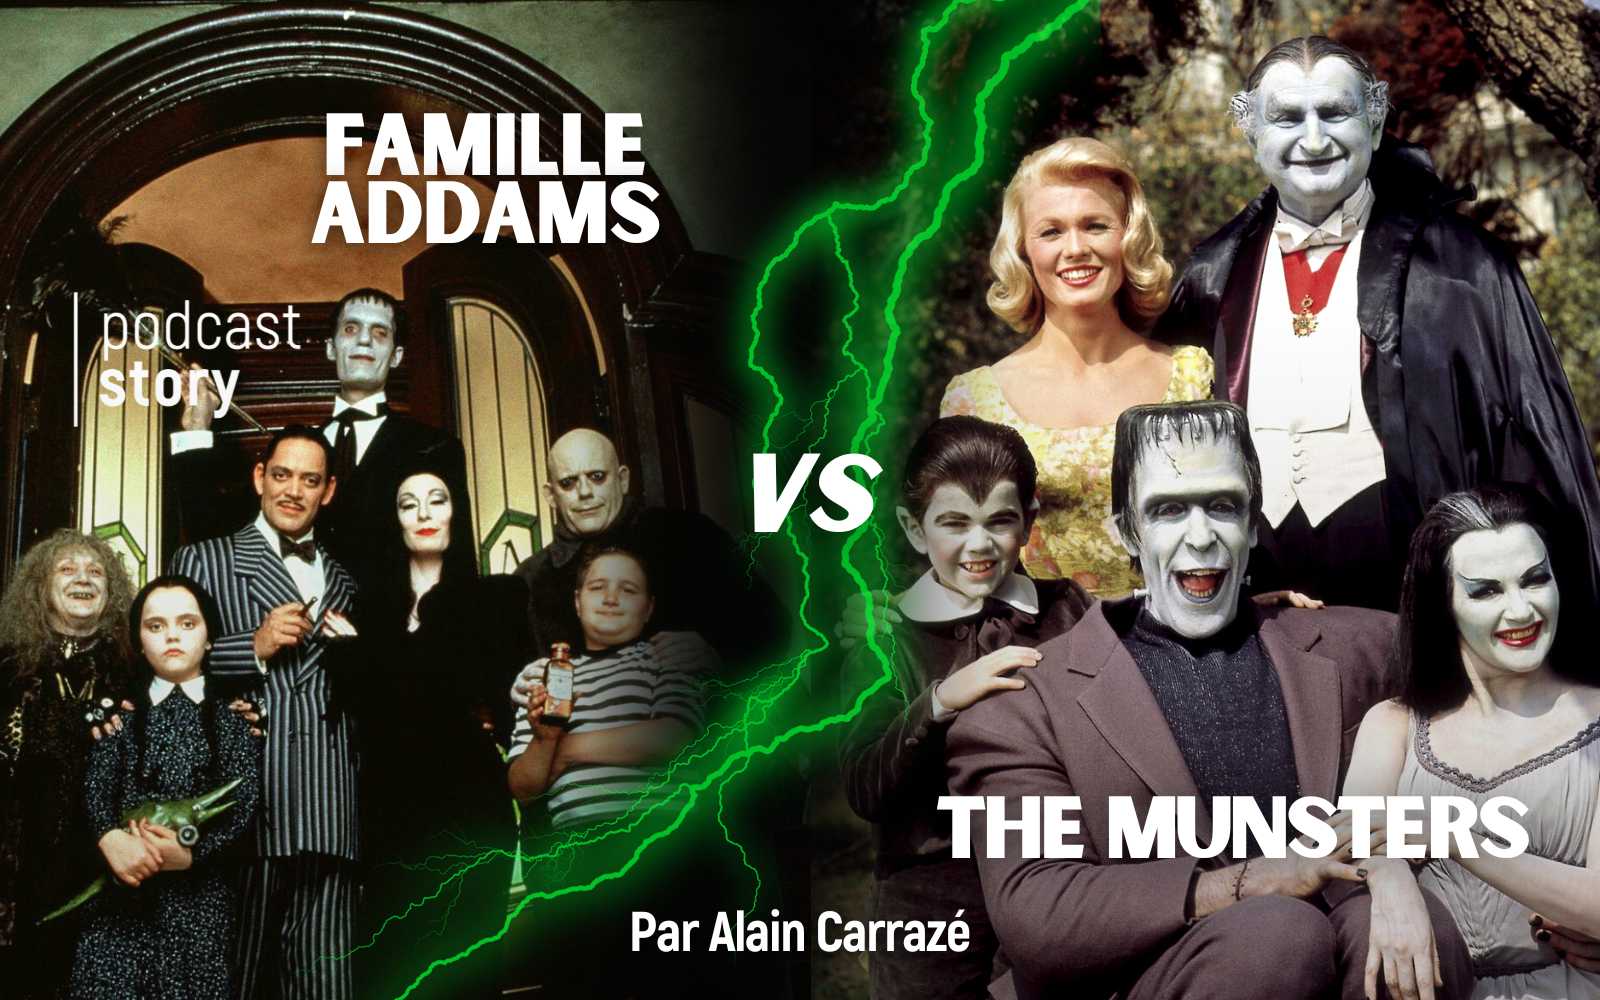 FAMILLE ADDAMS VS THE MUNSTERS